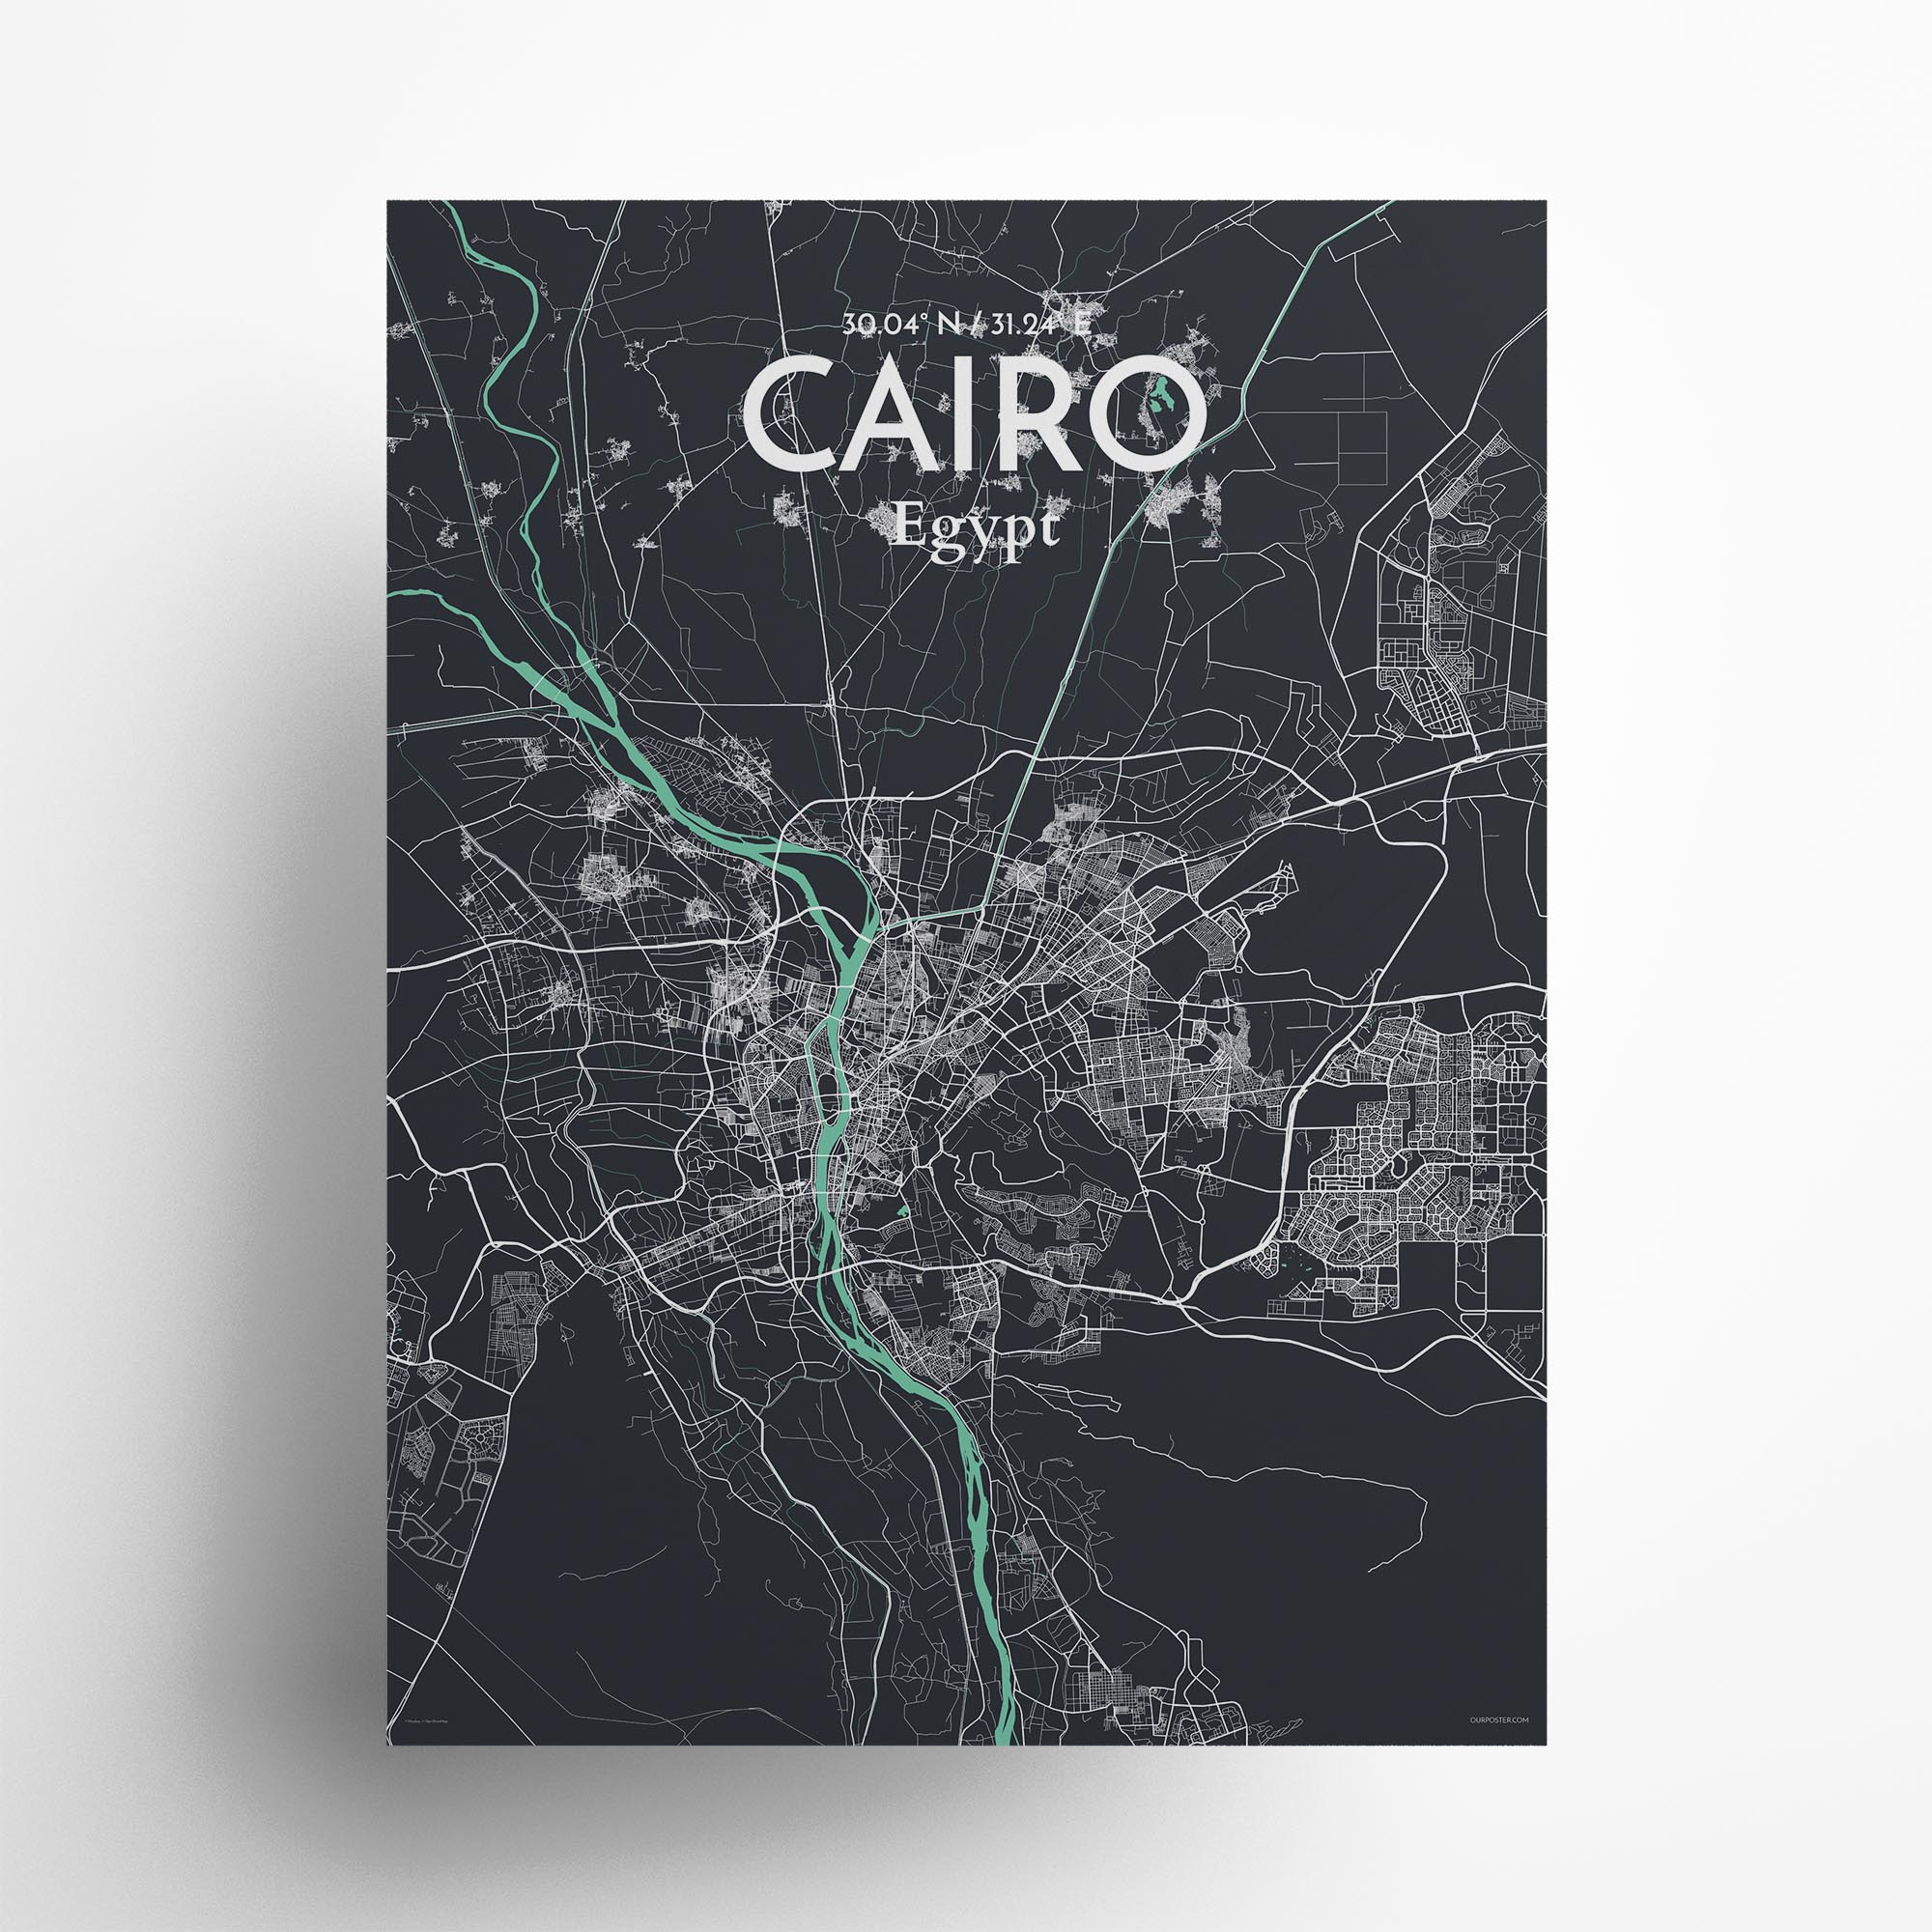 Cairo city map poster in Dream of size 18" x 24"